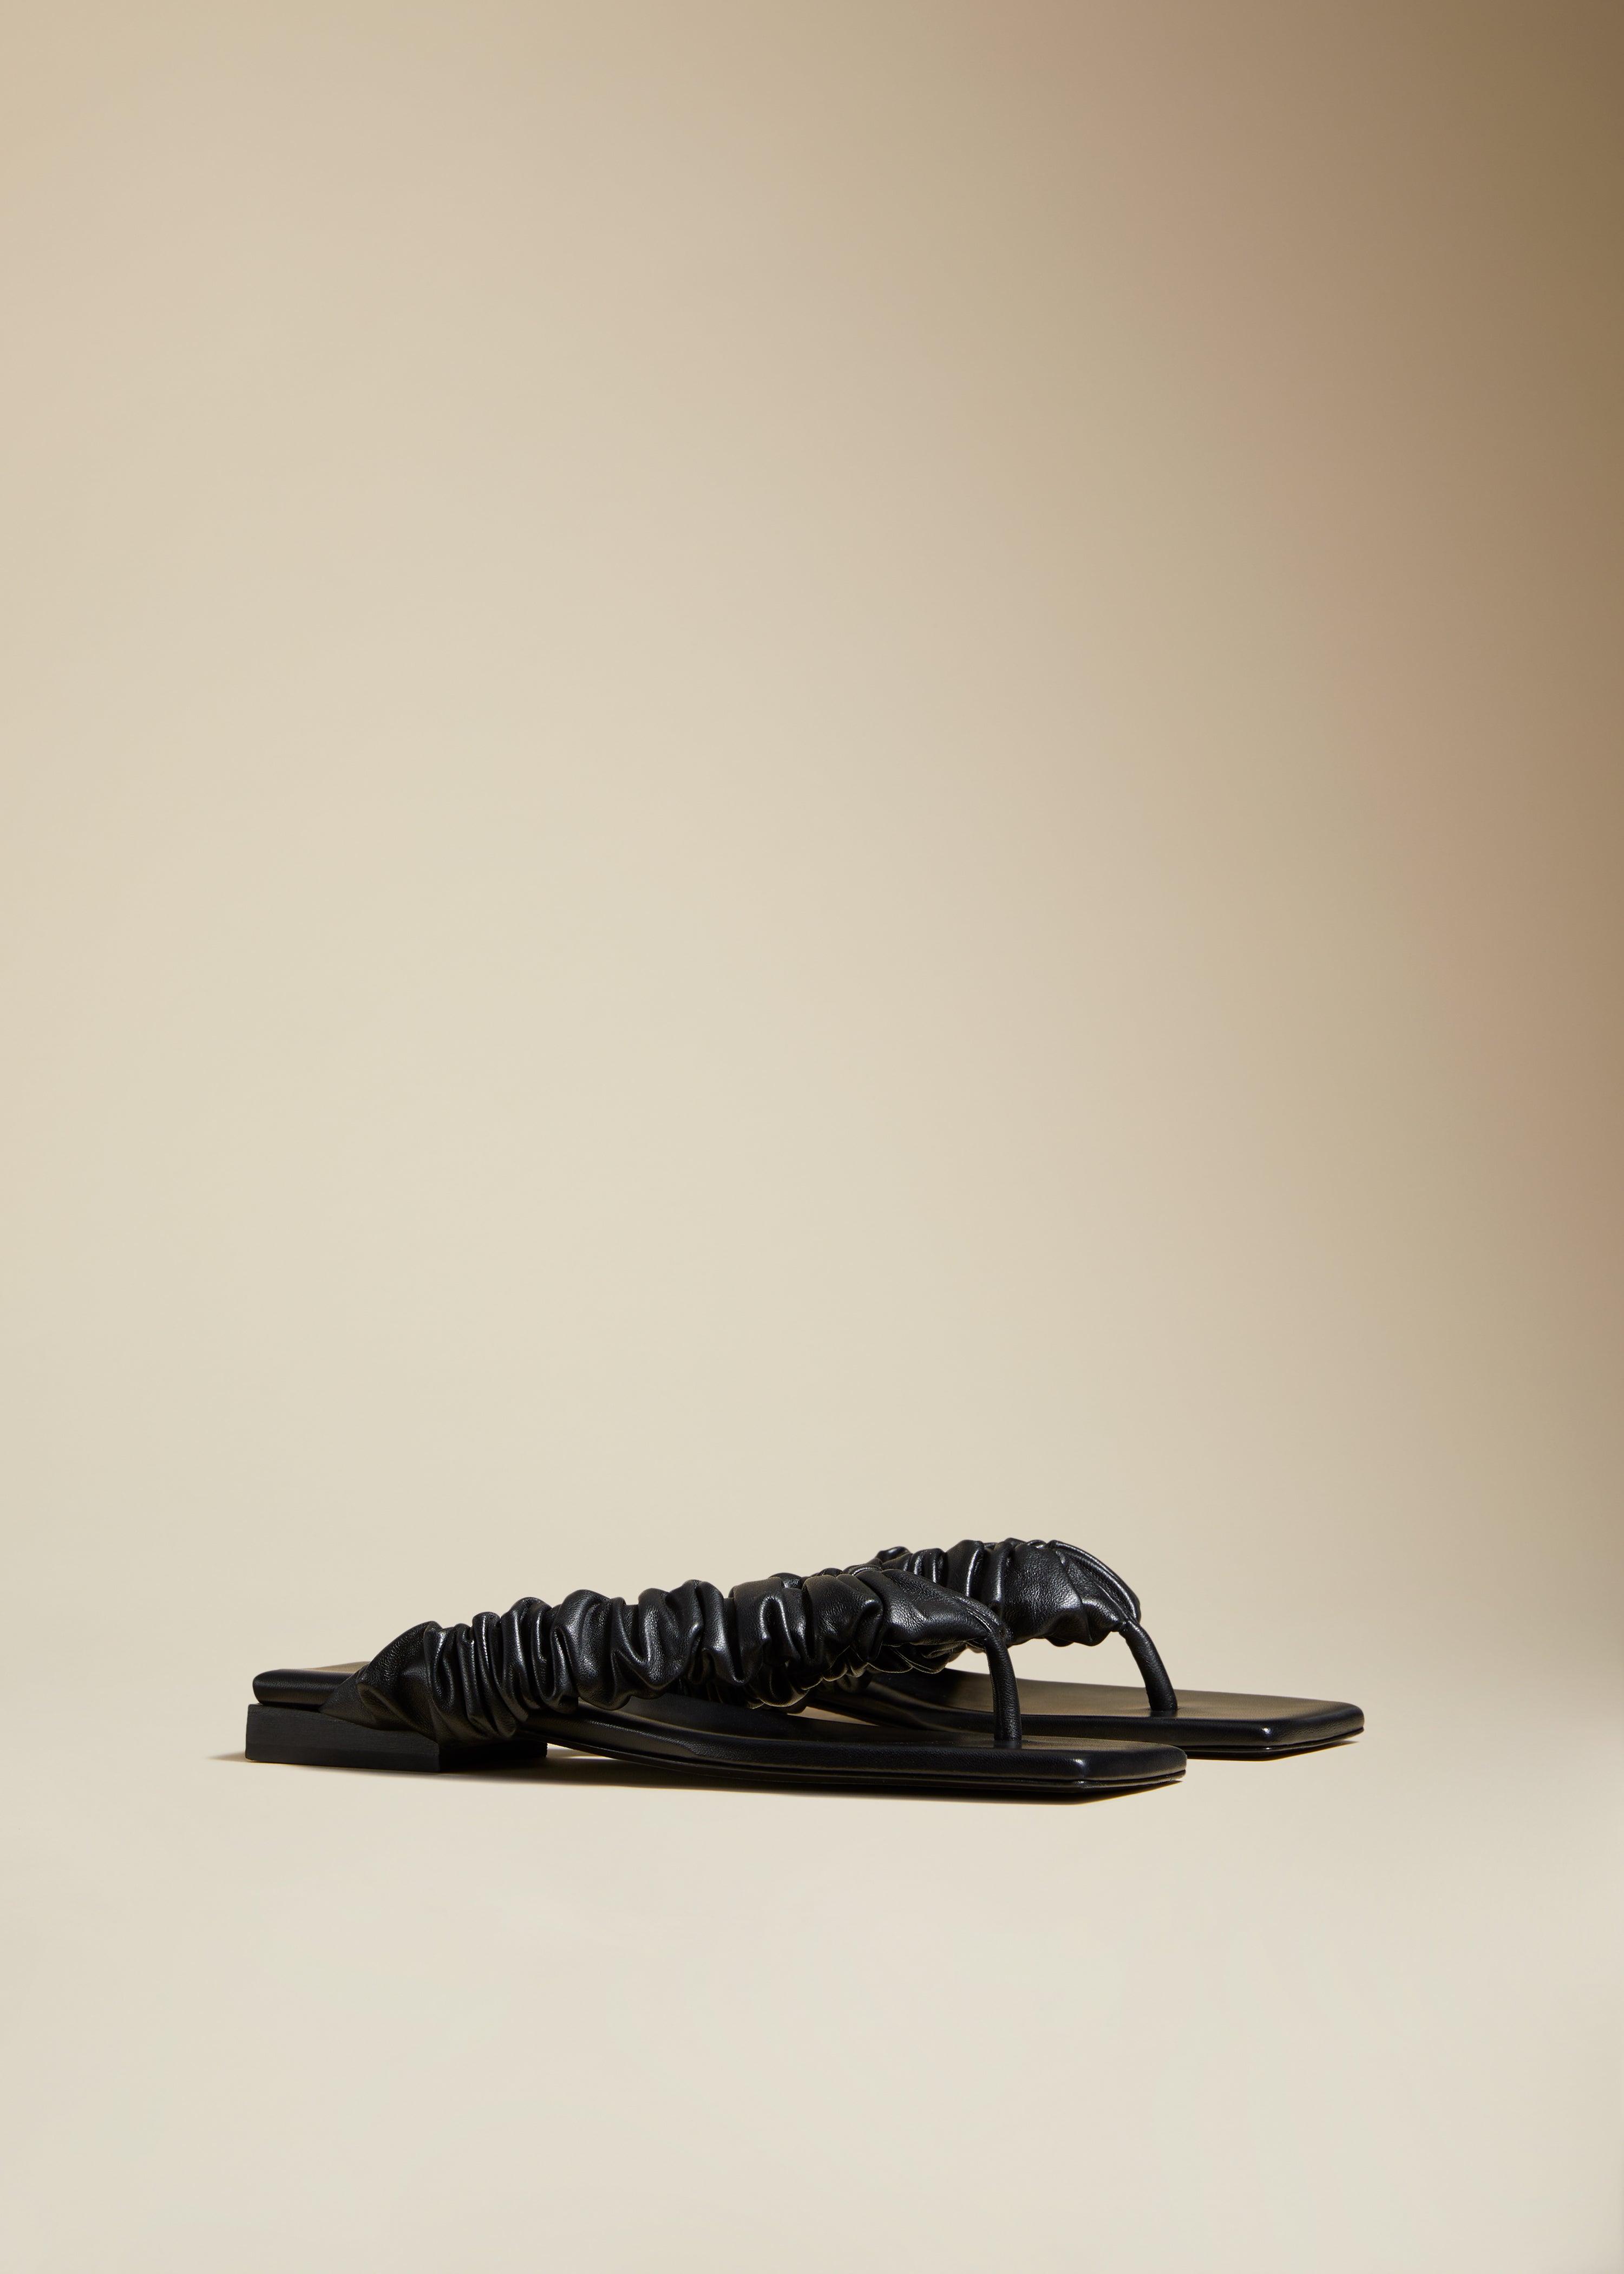 The Ash Sandal in Black Leather - The Iconic Issue